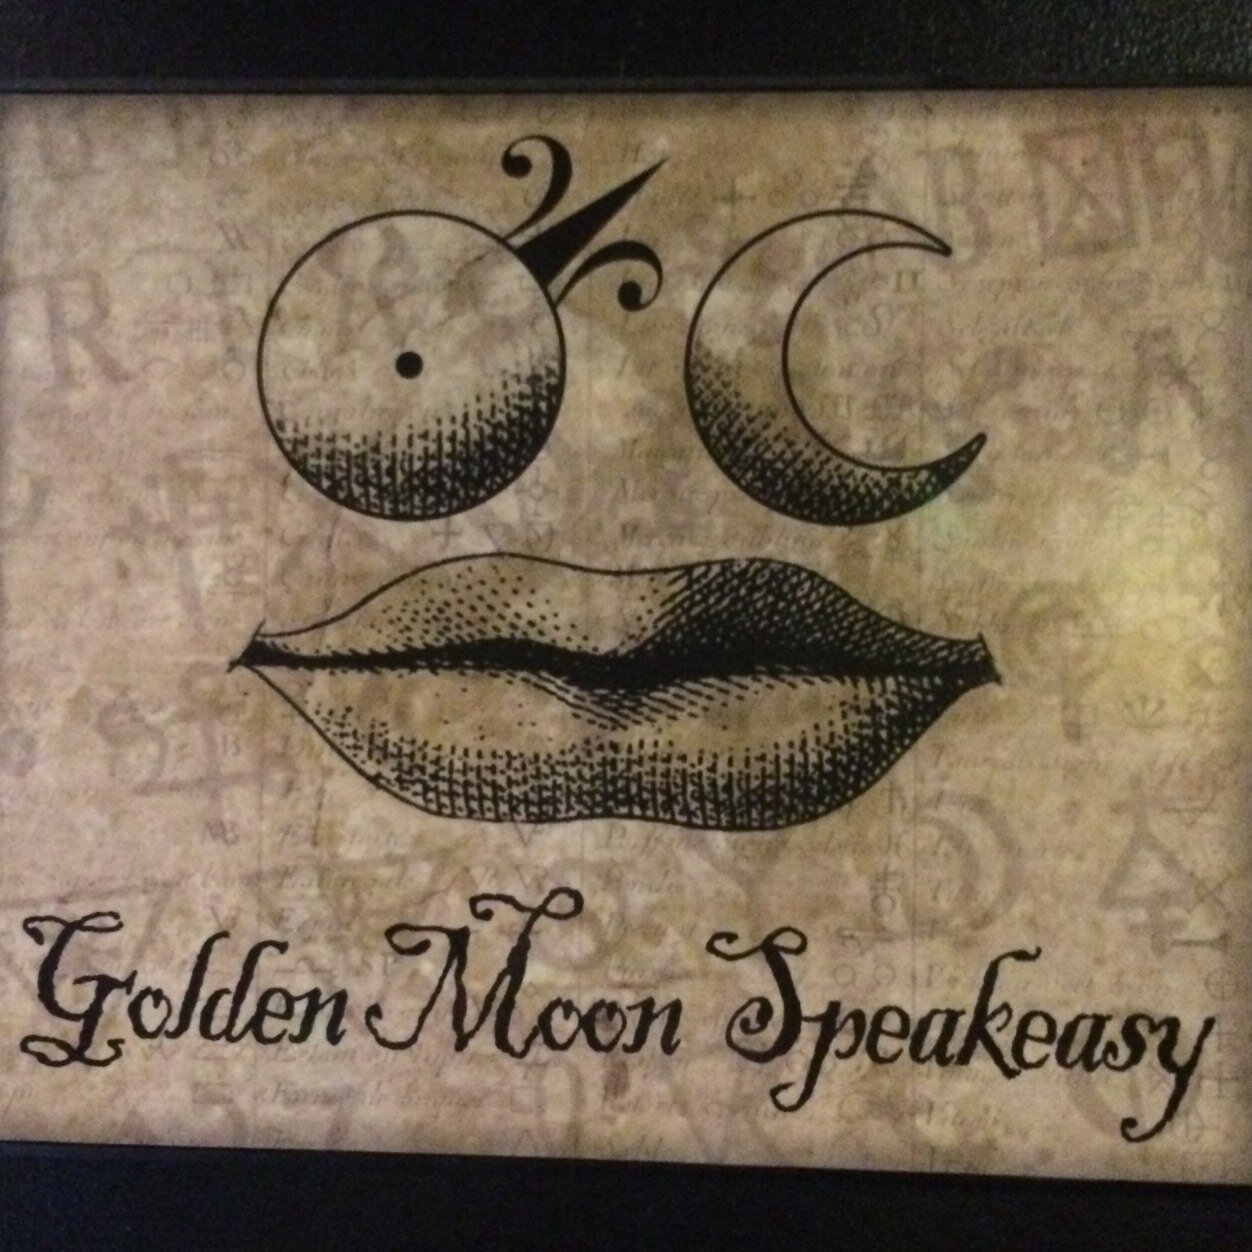 Speakeasy style tasting room and cocktail lounge for Golden Moon Distillery.